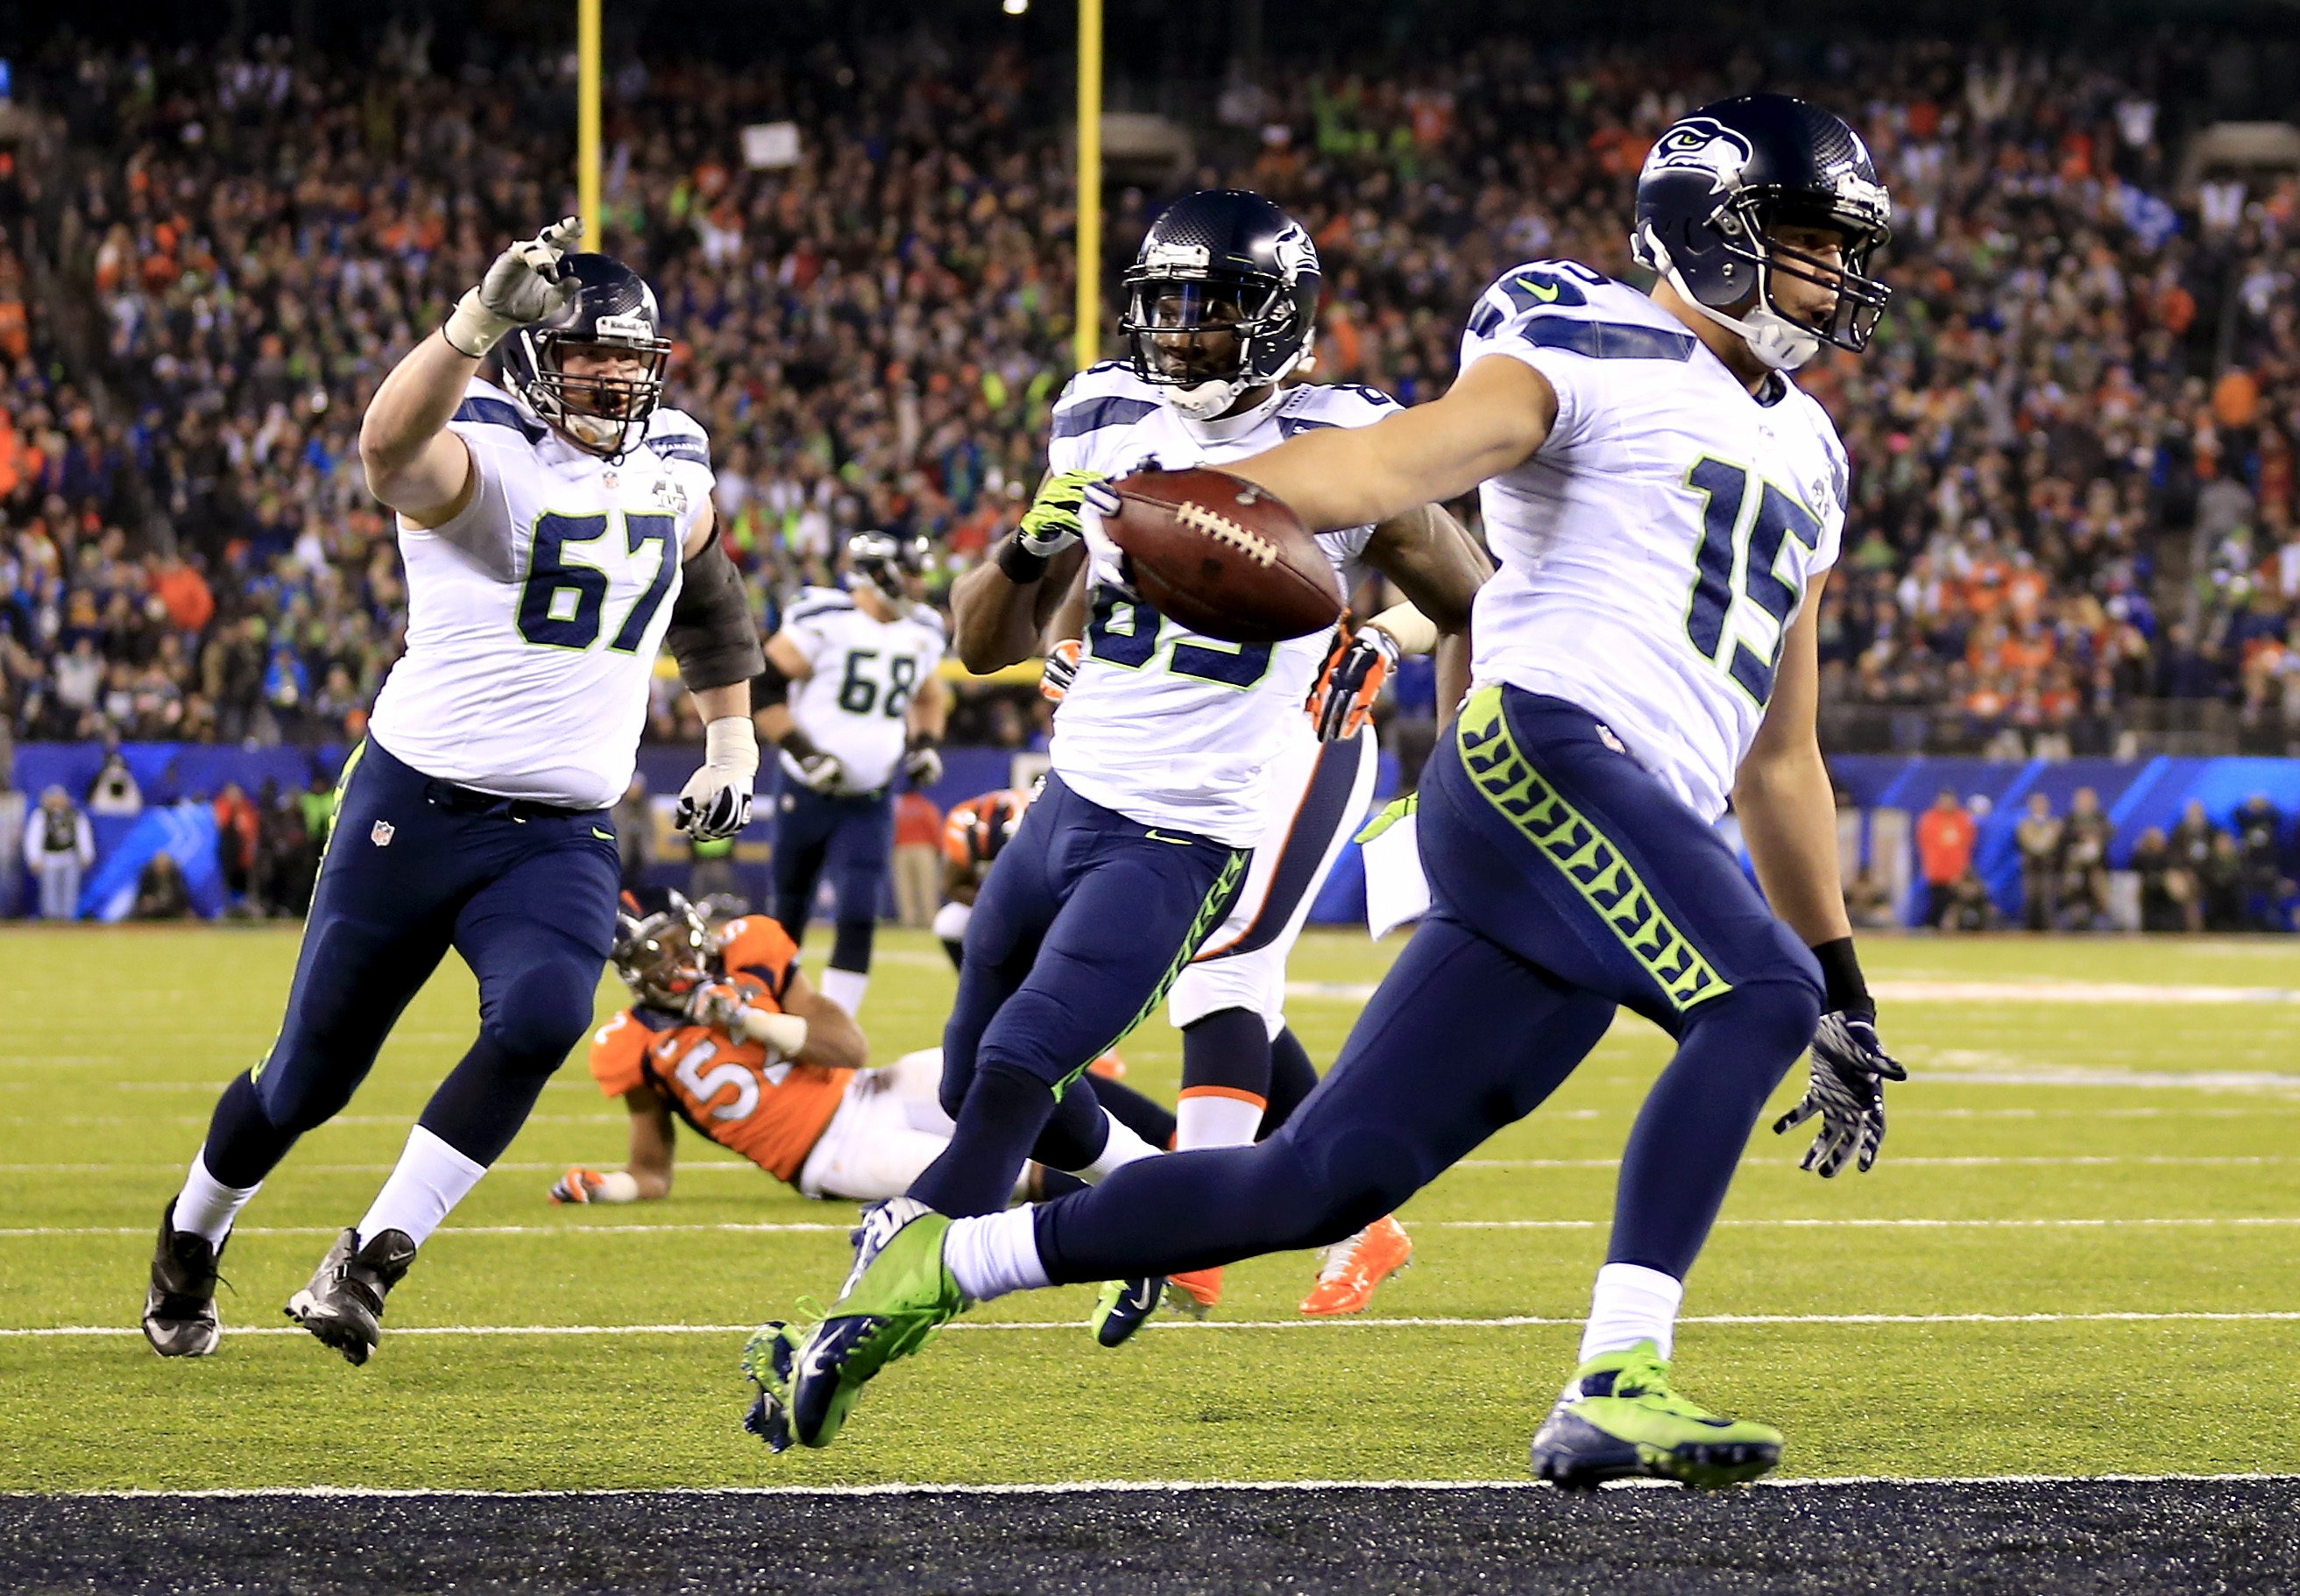 Wide receiver Jermaine Kearse #15 of the Seattle Seahawks runs 23 yards to score a third quarter touchdown against the Denver Broncos during Super Bowl XLVIII at MetLife Stadium on February 2, 2014 in East Rutherford, New Jersey. (Rob Carr&mdash;Getty Images)